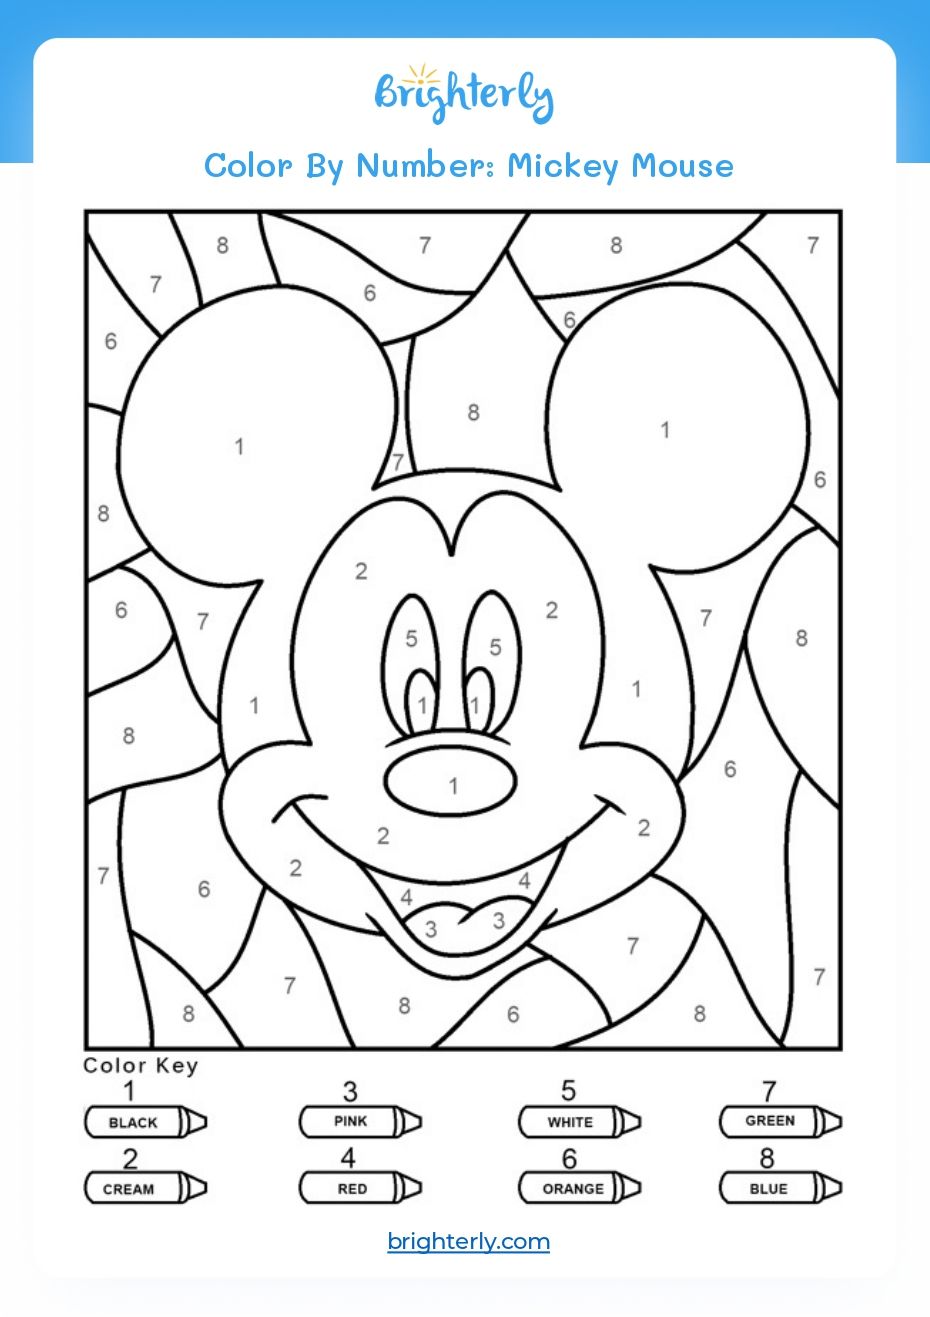 free-printable-color-by-number-worksheets-for-kids-brighterly